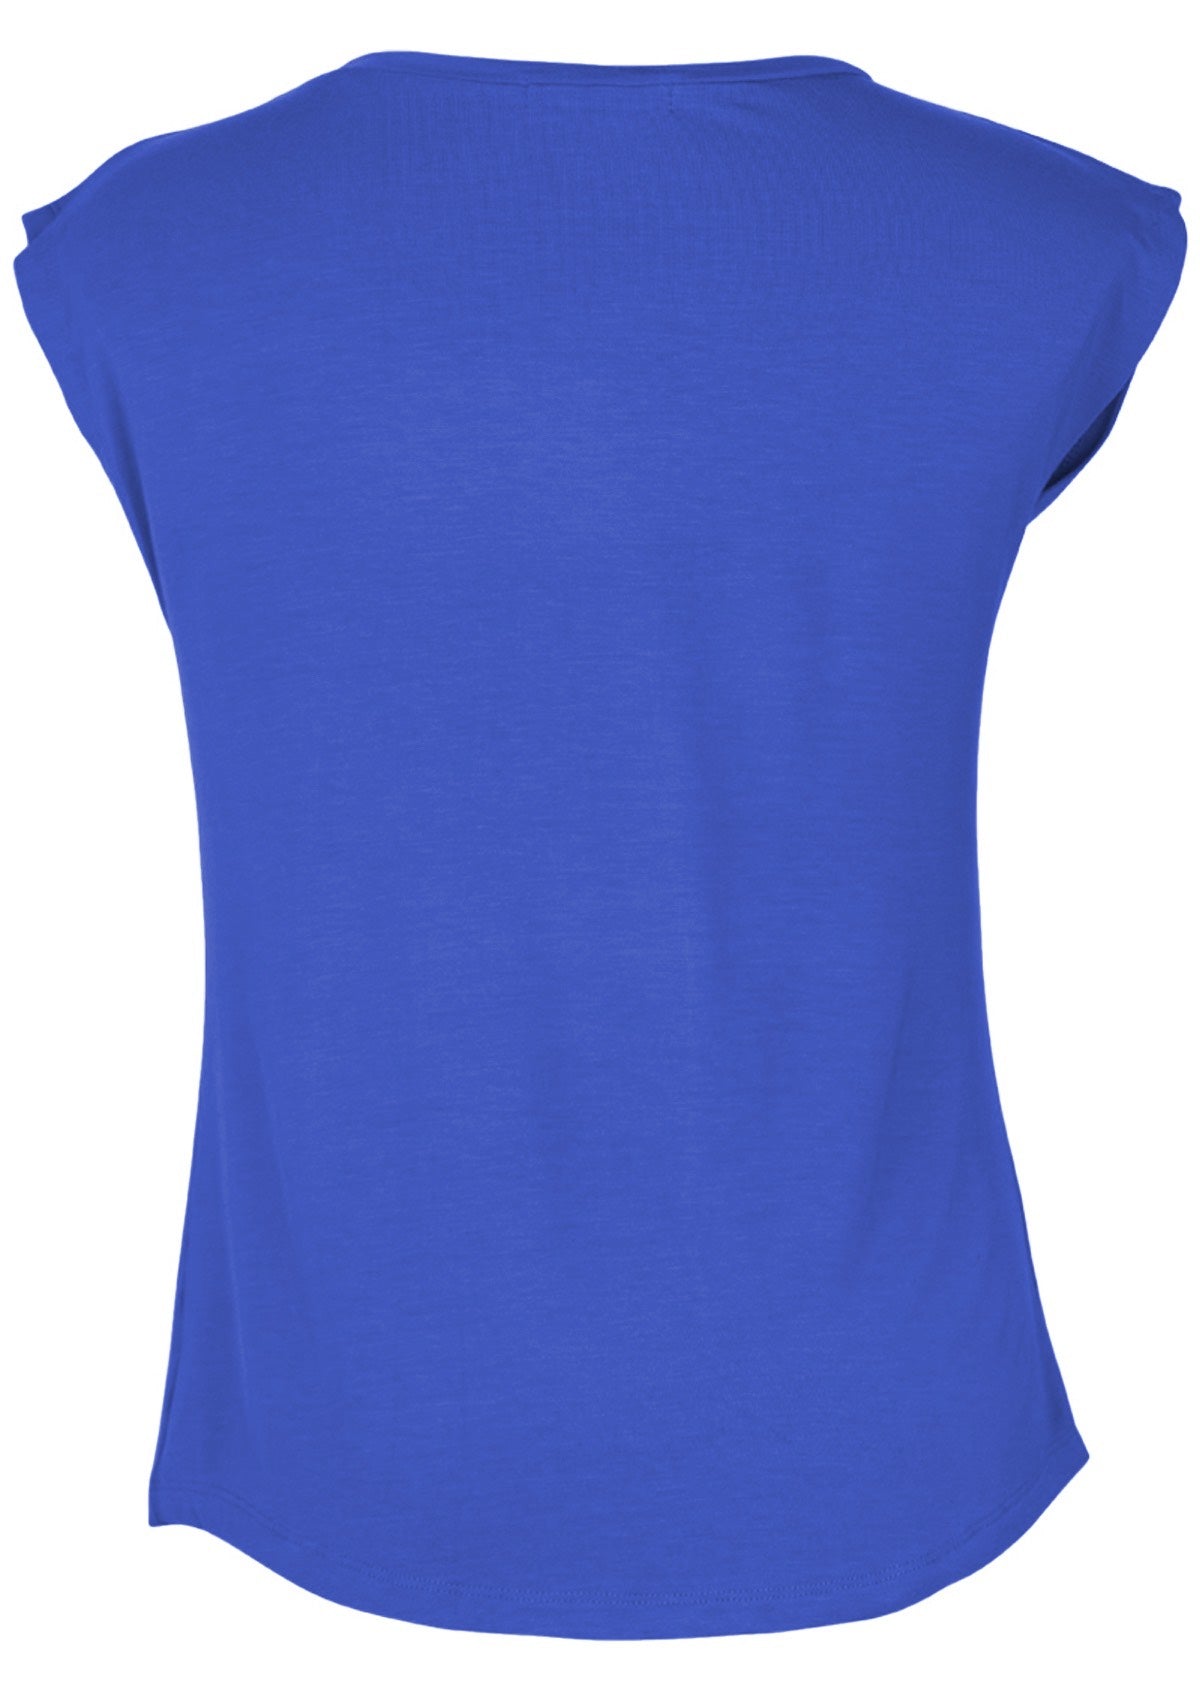 Back view of a women's blue v-neck short cap sleeve rayon top